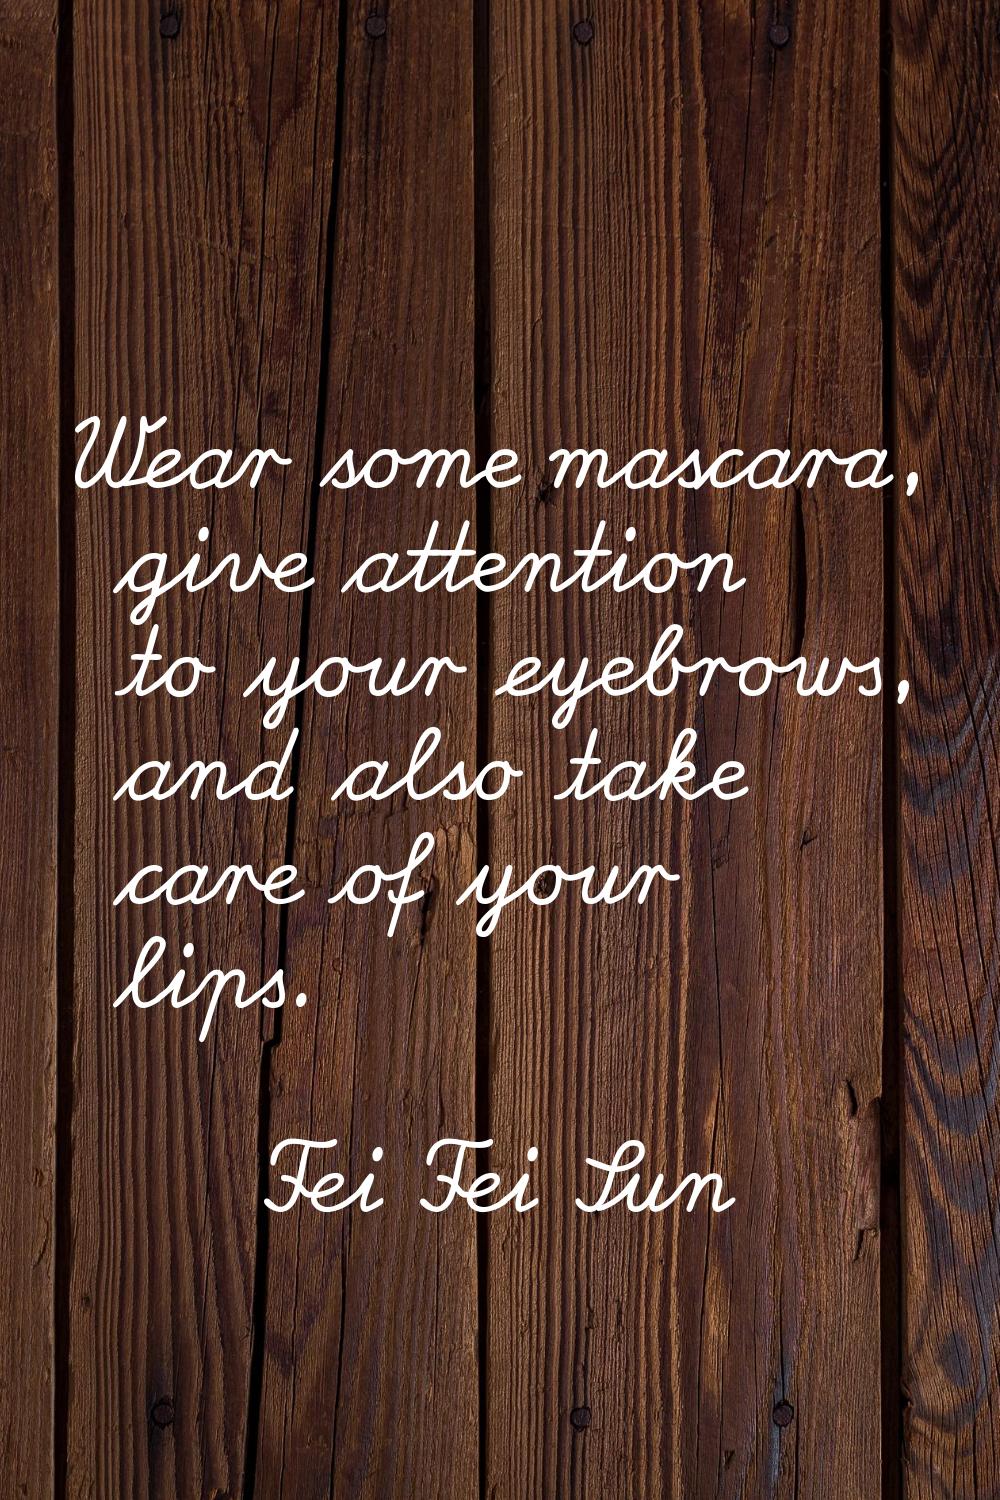 Wear some mascara, give attention to your eyebrows, and also take care of your lips.